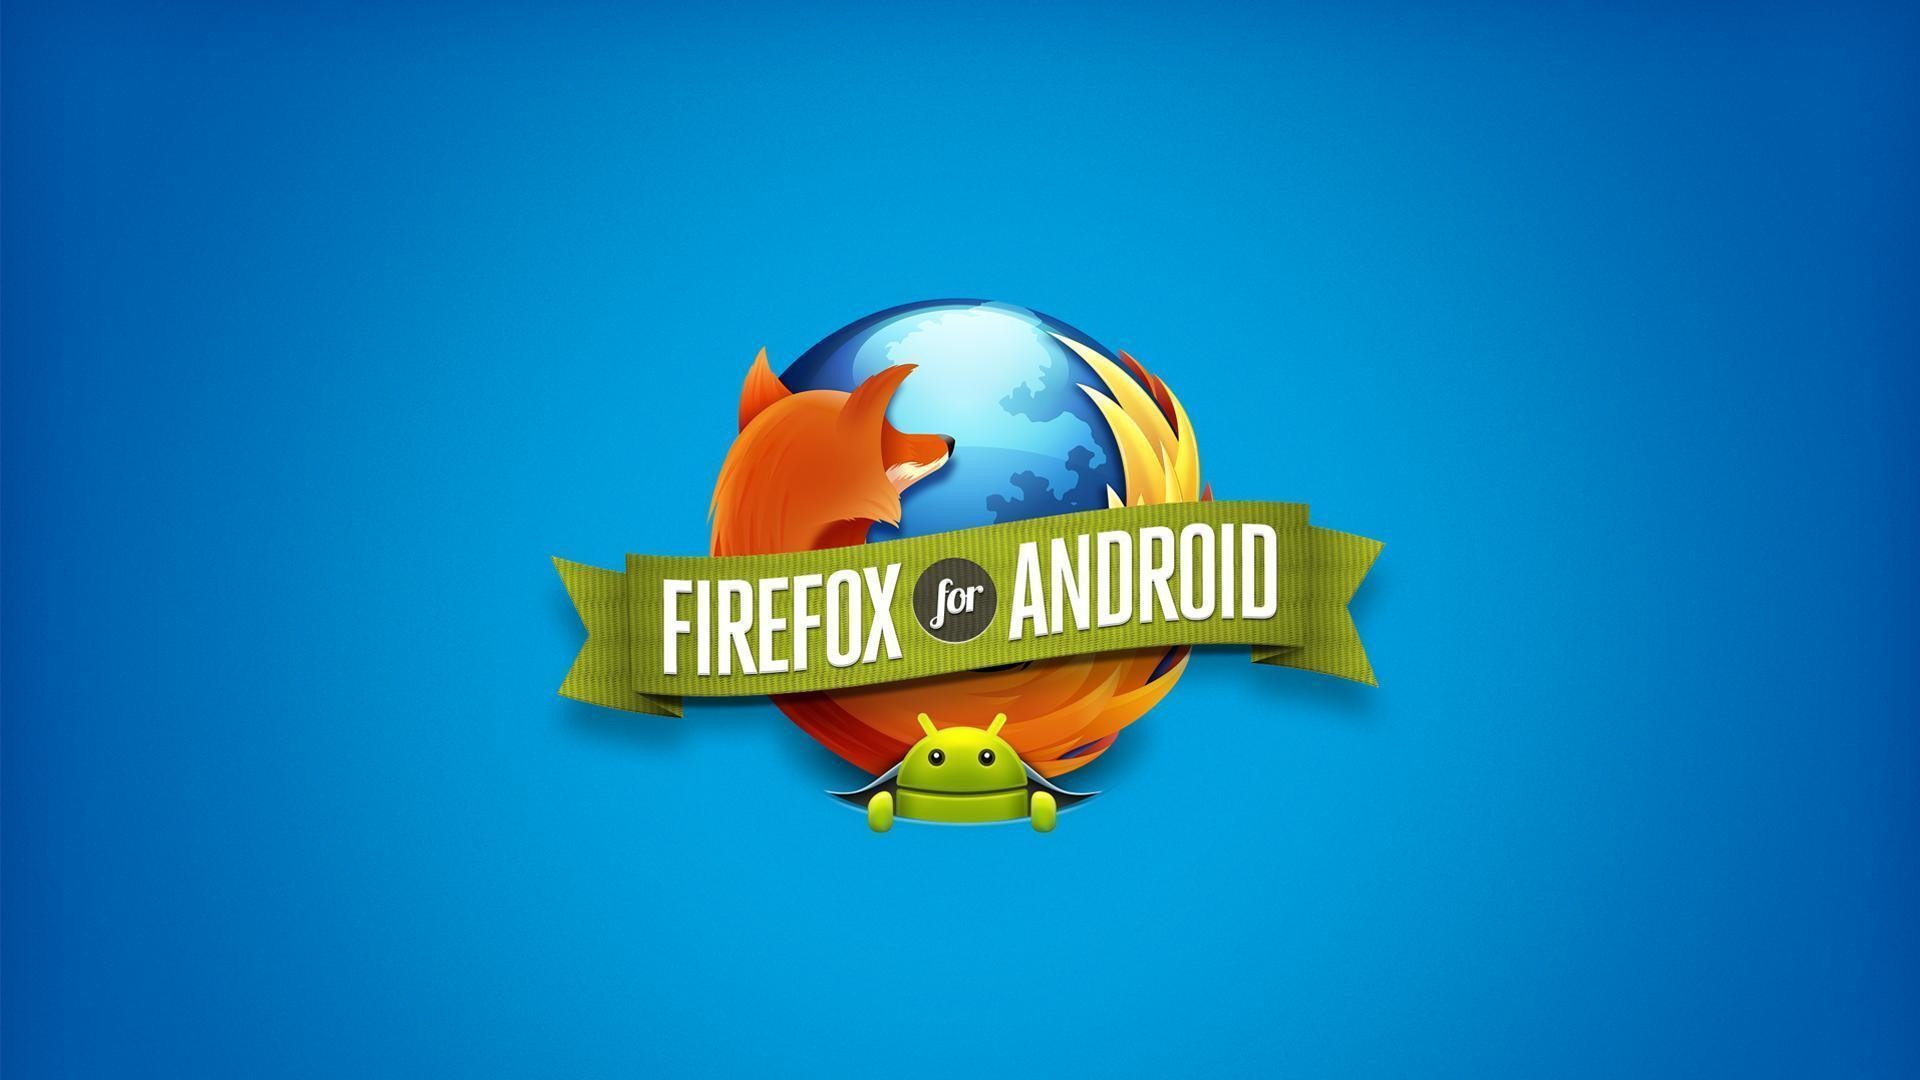 1920x1080 Mozilla Firefox Wallpaper Themes For Android #3378 Wallpaper .